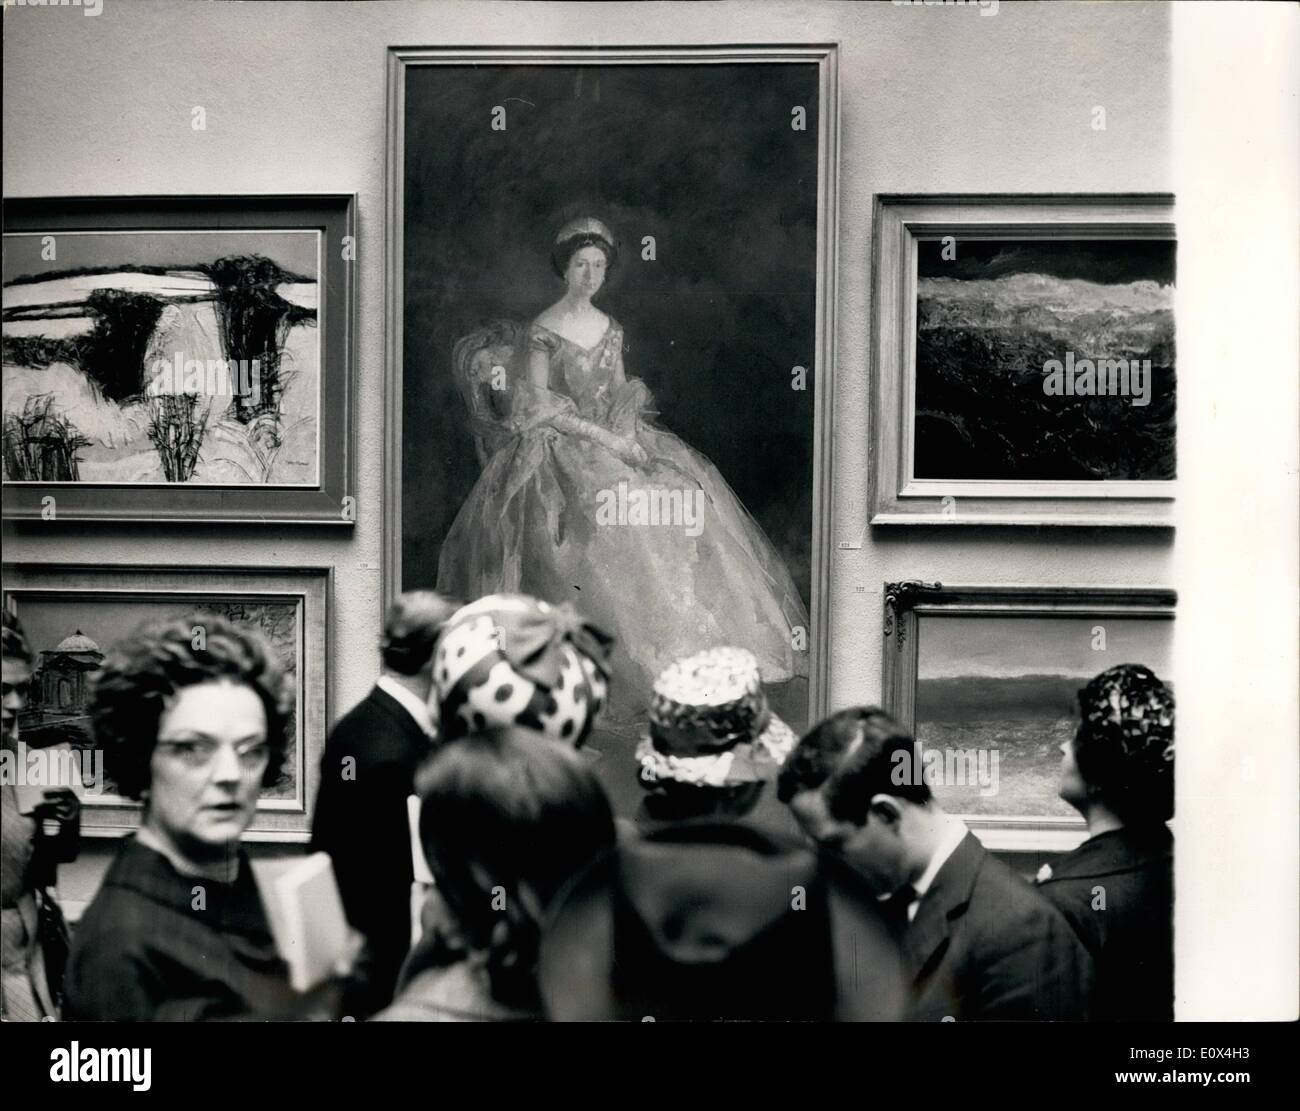 Apr. 04, 1965 - Private View Of The Royal Academy Summer Exhibition. Photo shows Visitors at today's Private View of the Royal Academy Summer Exhibition - looking at a new portrait of H.M. The Queen - by London artist, Peter Greenham. Stock Photo